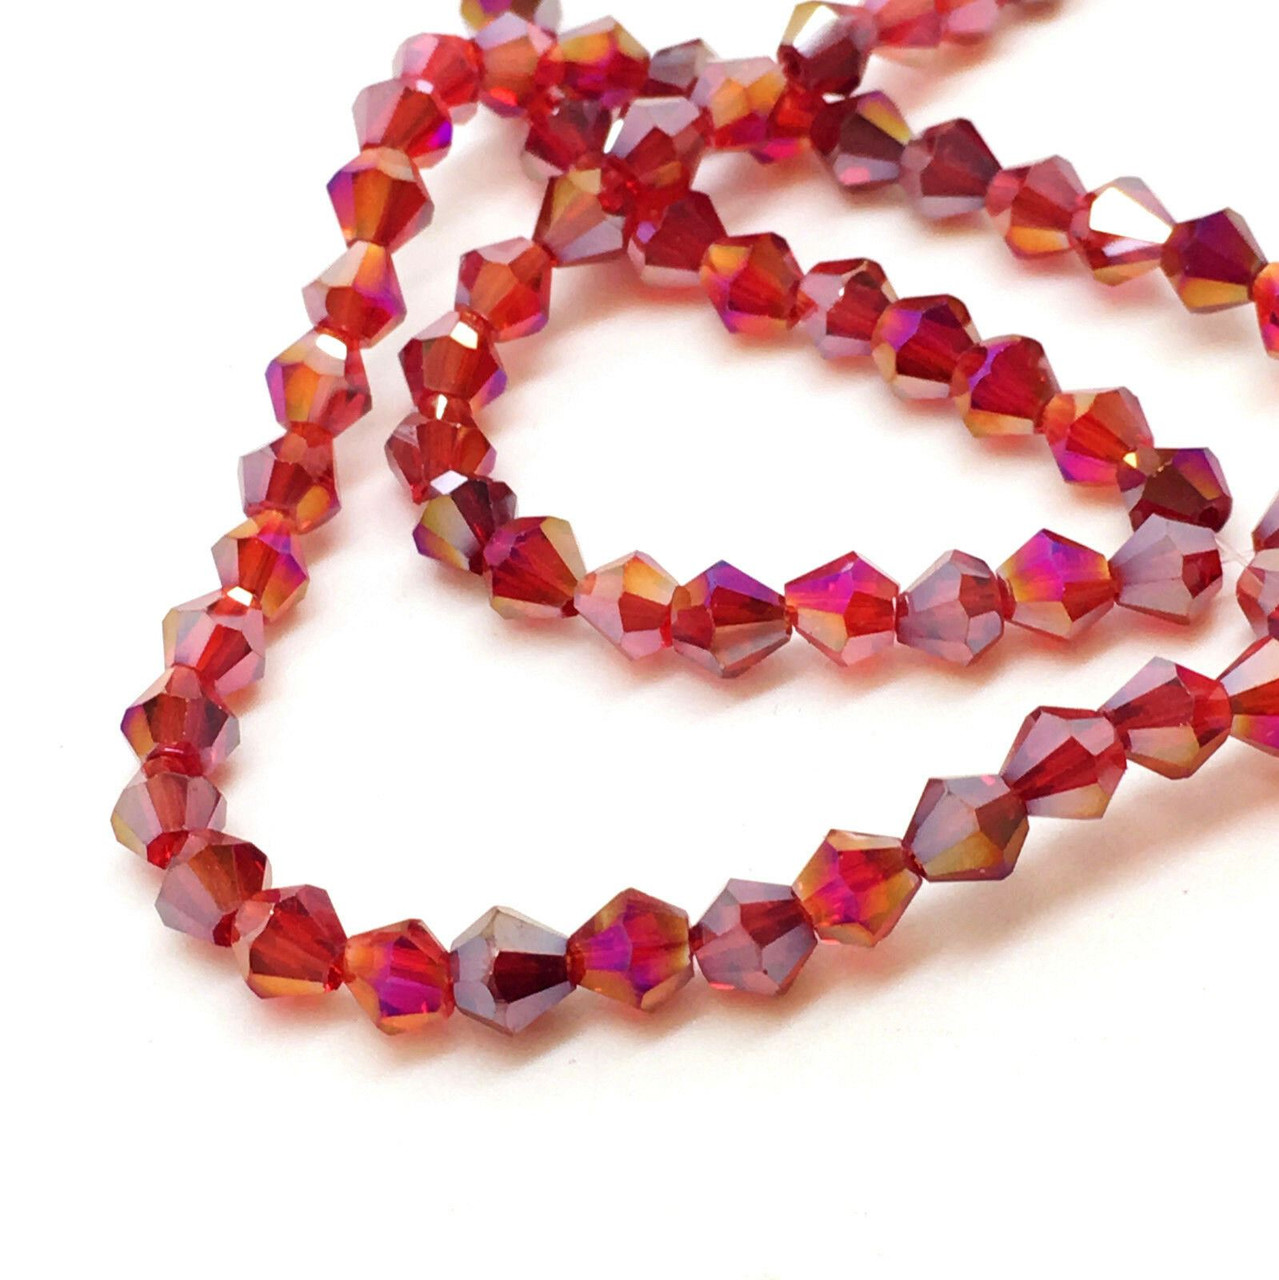 4mm Glass Bicone beads - DARK RED AB - approx 16" strand (115-120 beads)